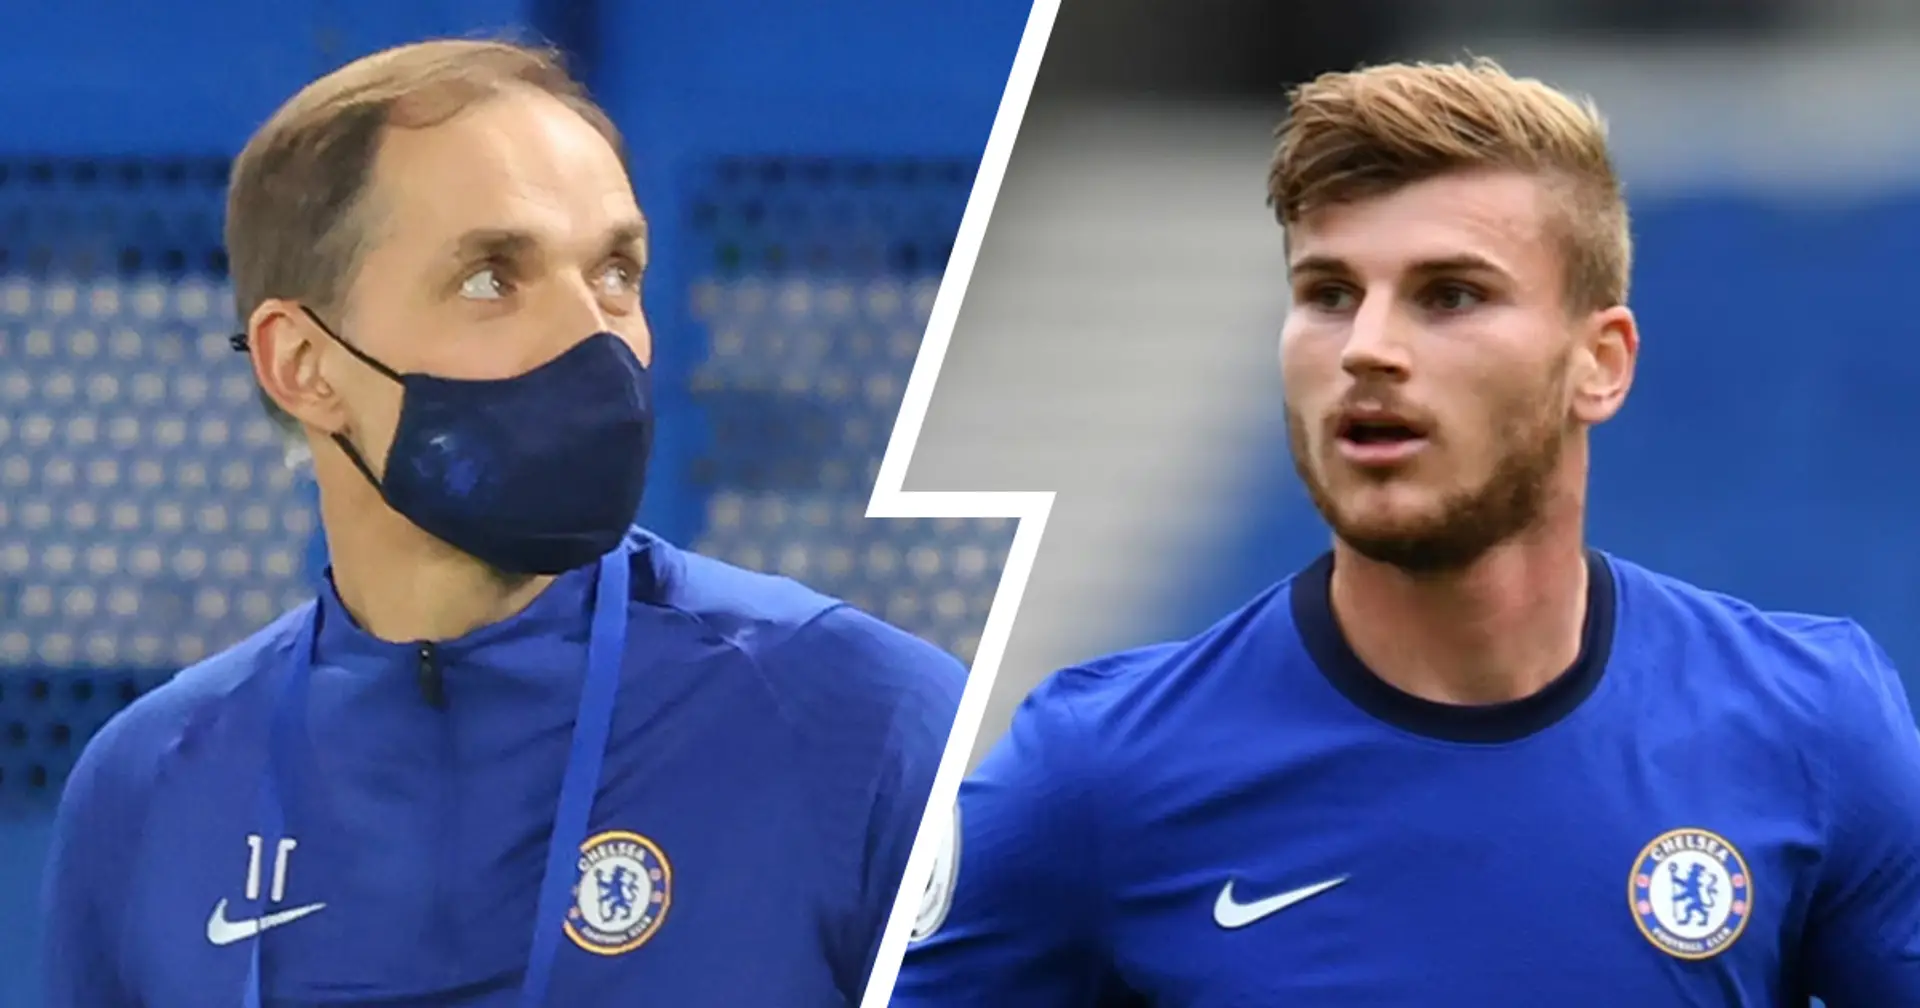 Tuchel plots Werner revival and 3 more big stories at Chelsea you might've missed